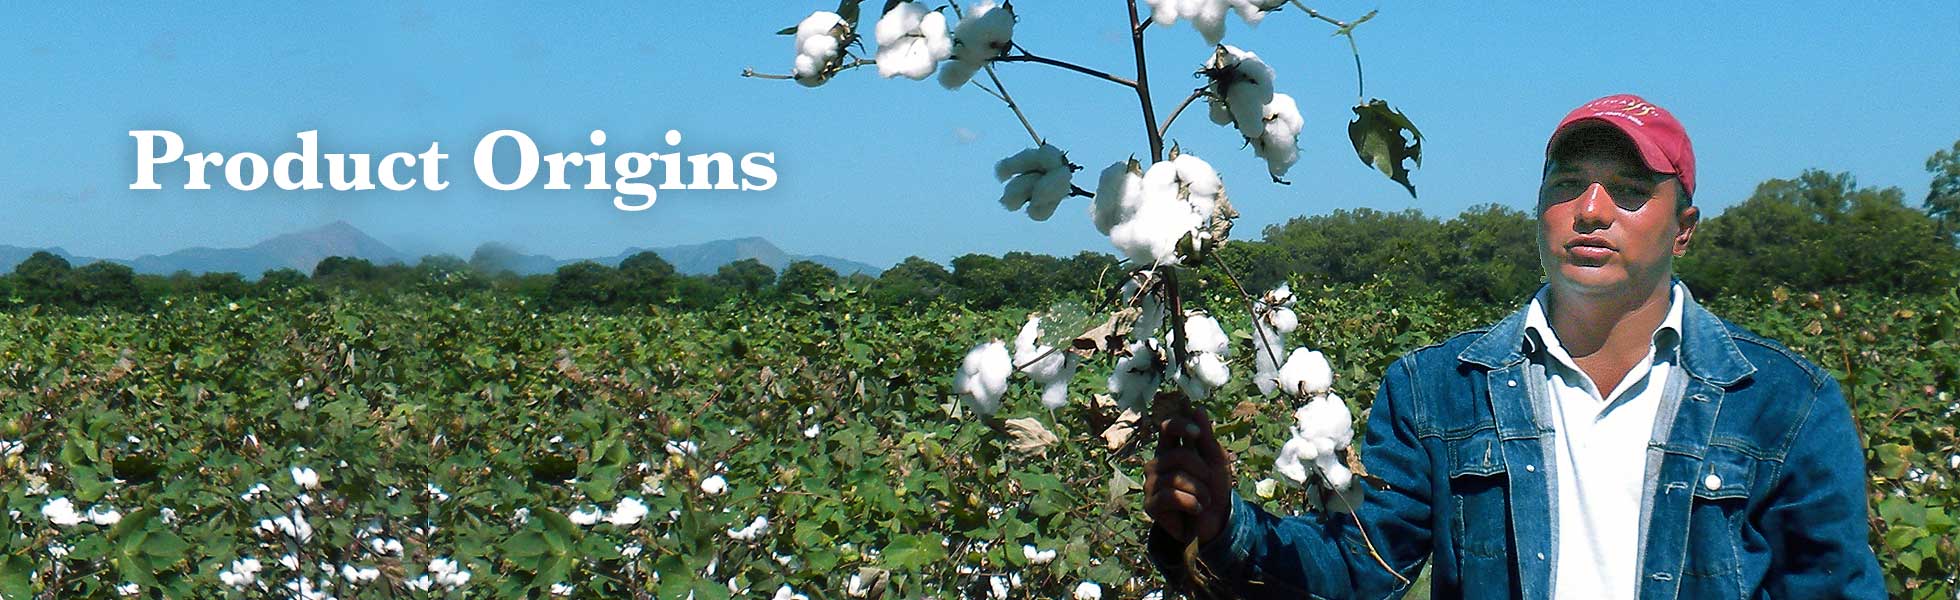 Person standing in a field of cotton holding up a branch of cotton. Text next to them reads: Product Origins.